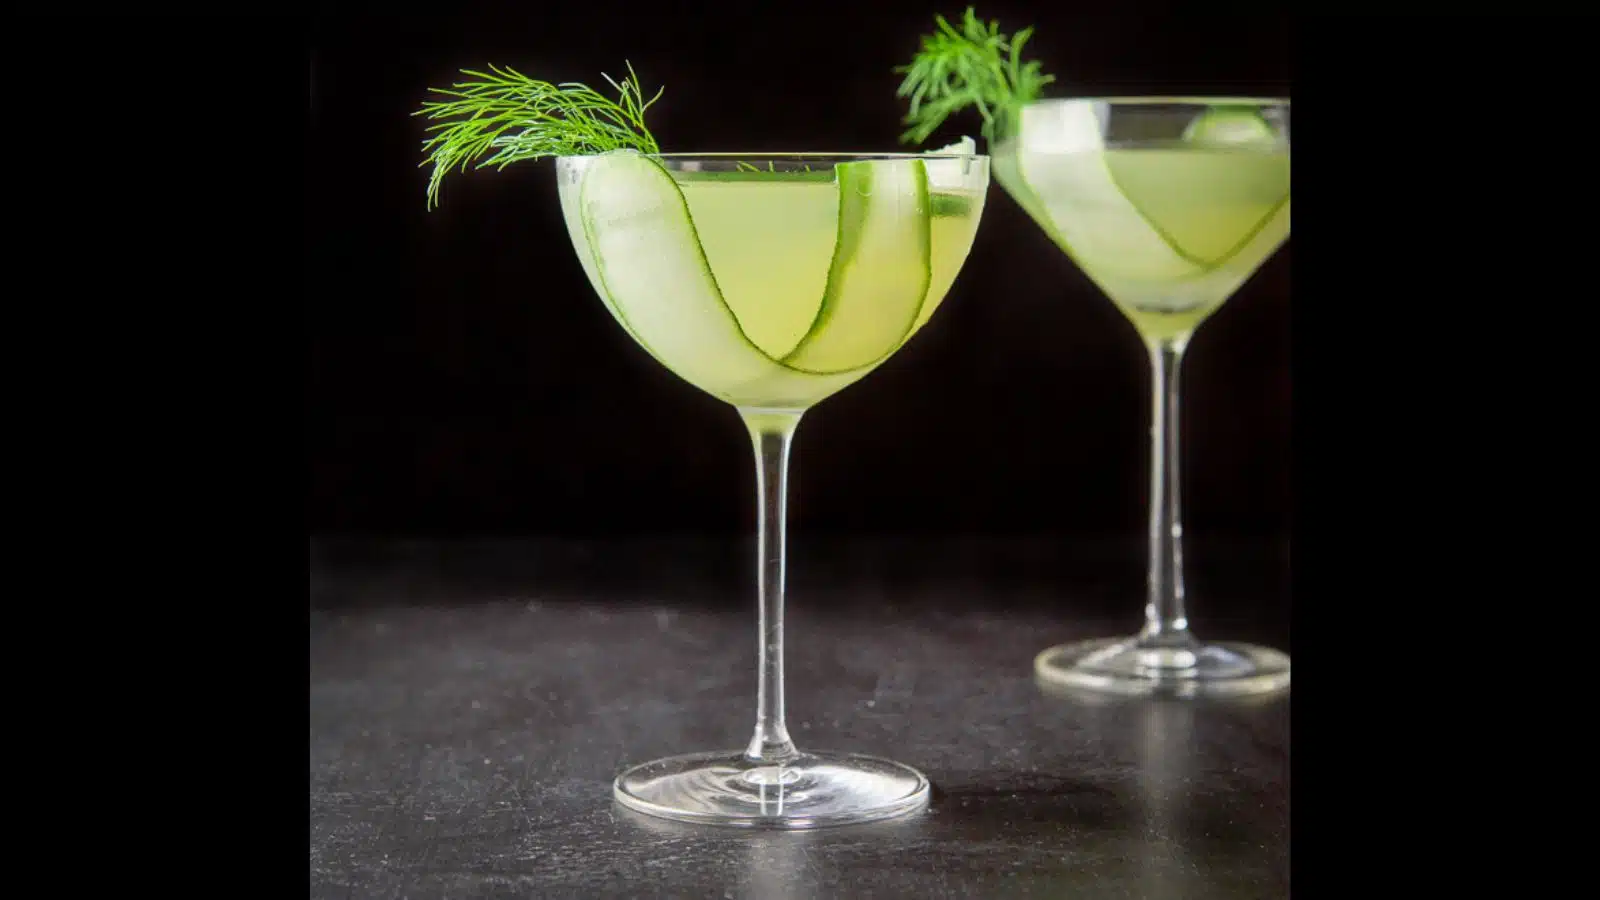 Two glasses with cucumber slices and dill in the lime drink